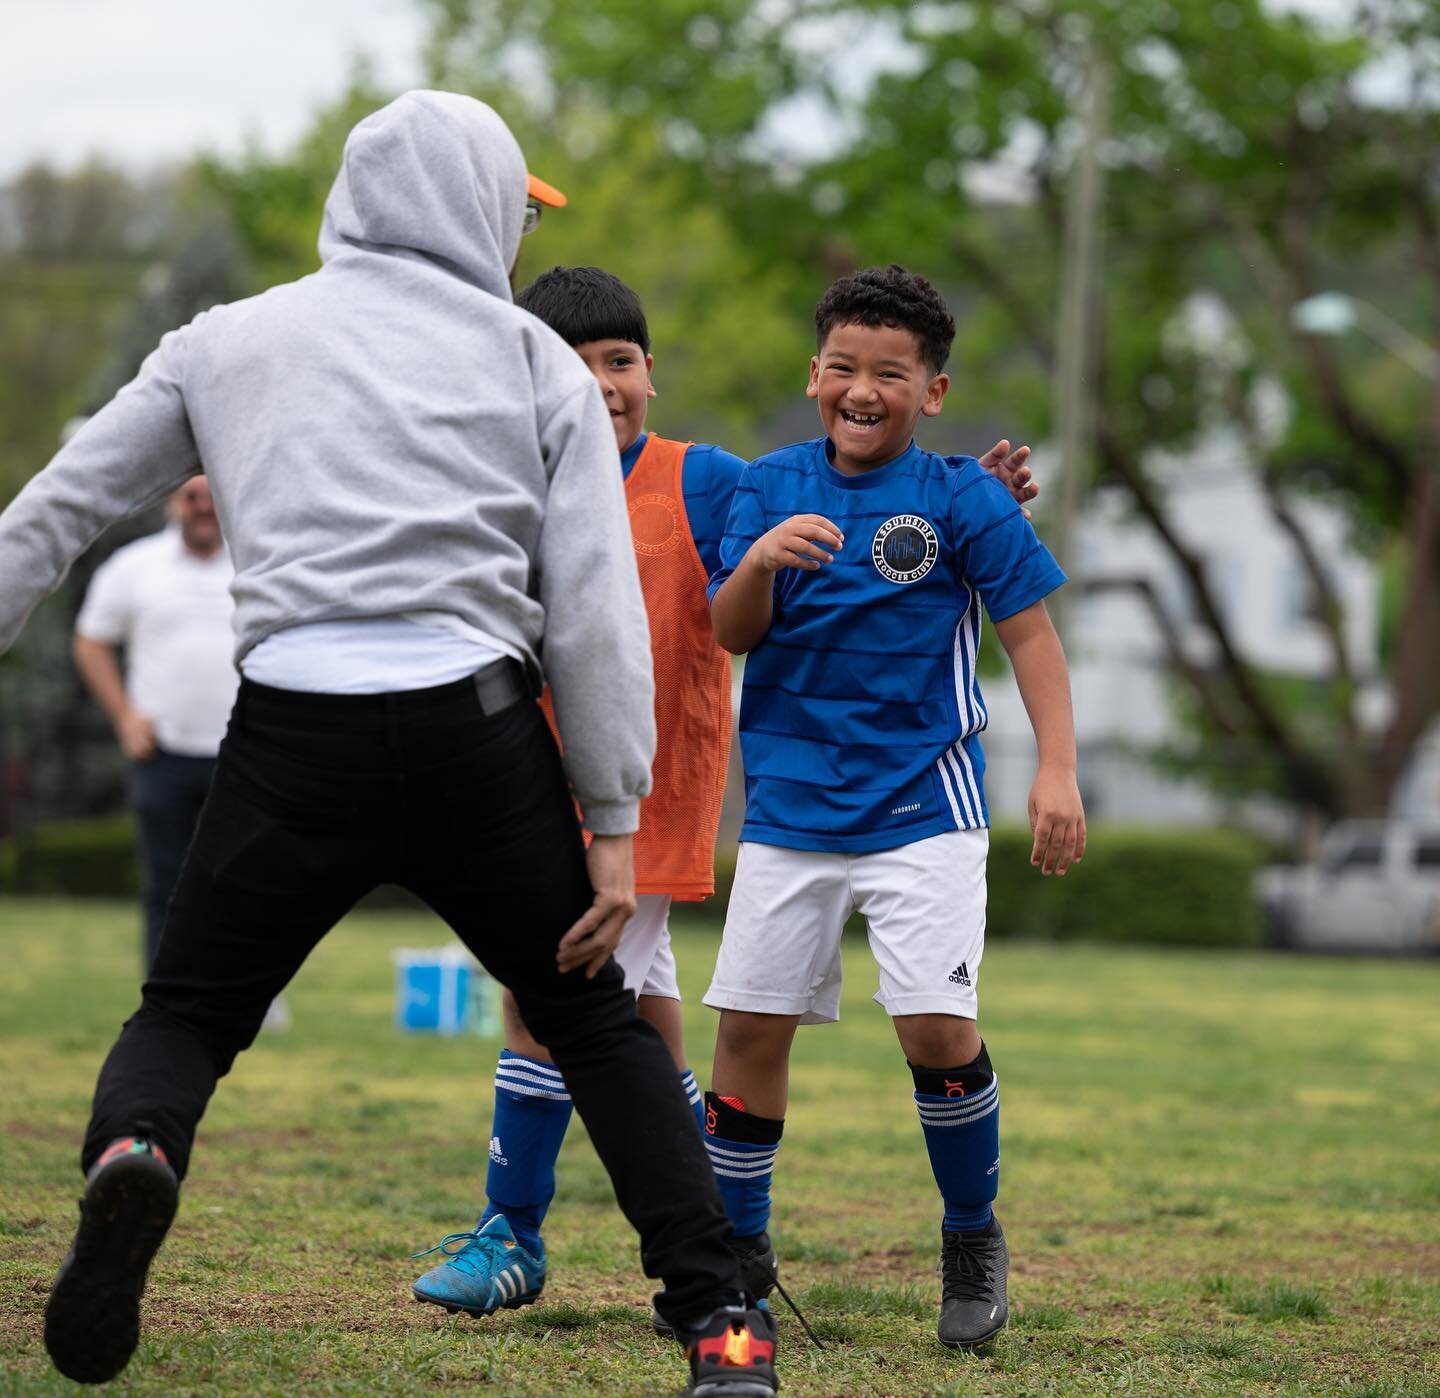 Smiles only come from one place, and that's the heart⚽️💙💪

Giovanni Hernandez scored his first goal, and it was a GOLAZO. Keep moving mountains kid! 

#haledon #prospectpark #northhaledon #paterson #passaiccountynj #njsoccer #usyouthsoccer